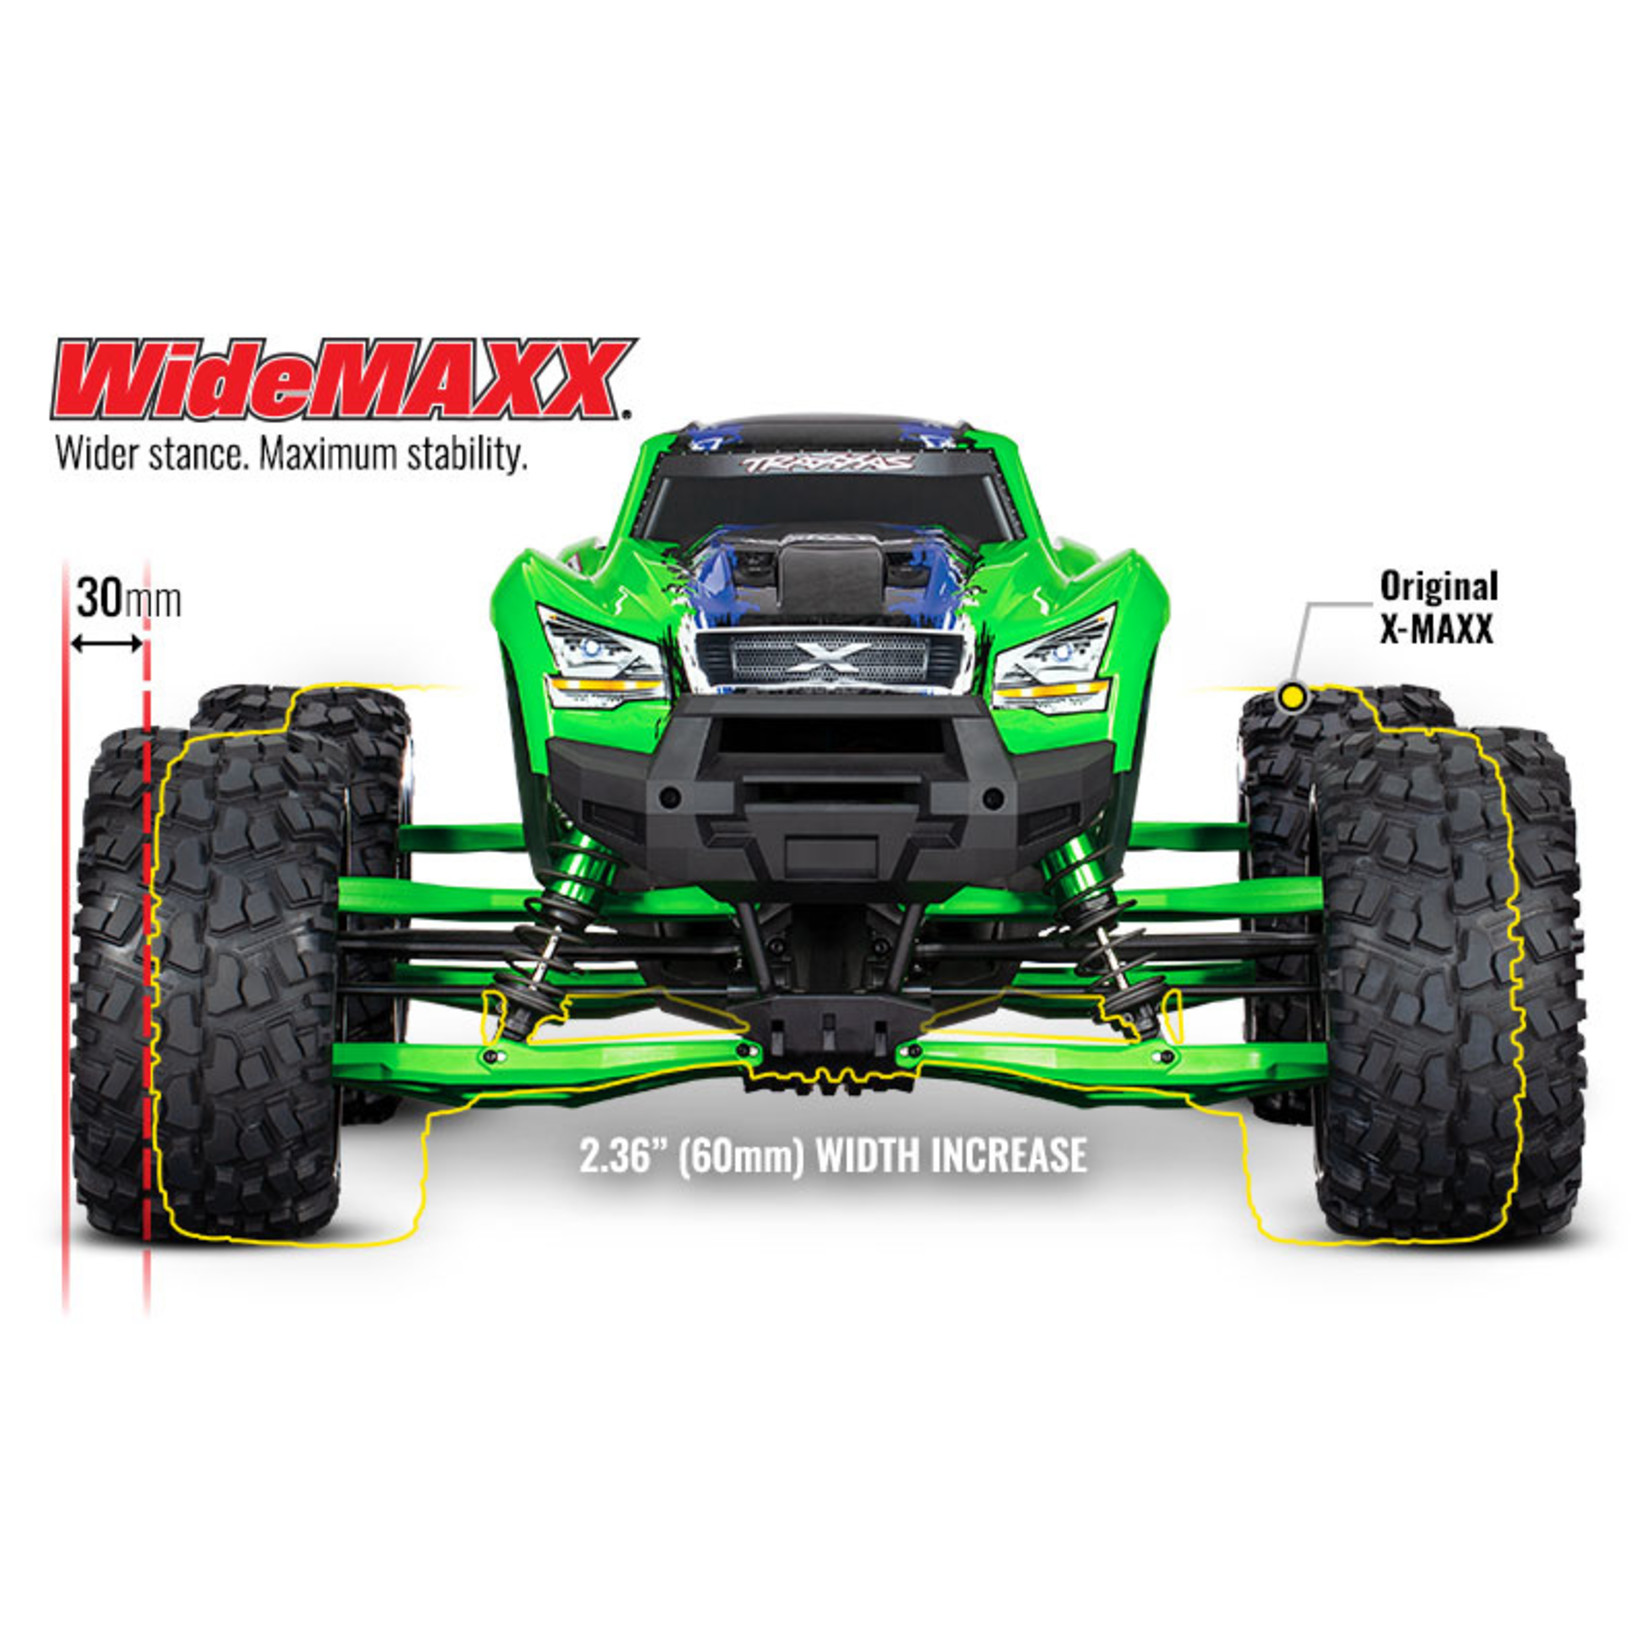 Traxxas 7895 Suspension kit, X-Maxx® WideMaxx®, black (includes front & rear suspension arms, front toe links, driveshafts, shock springs)